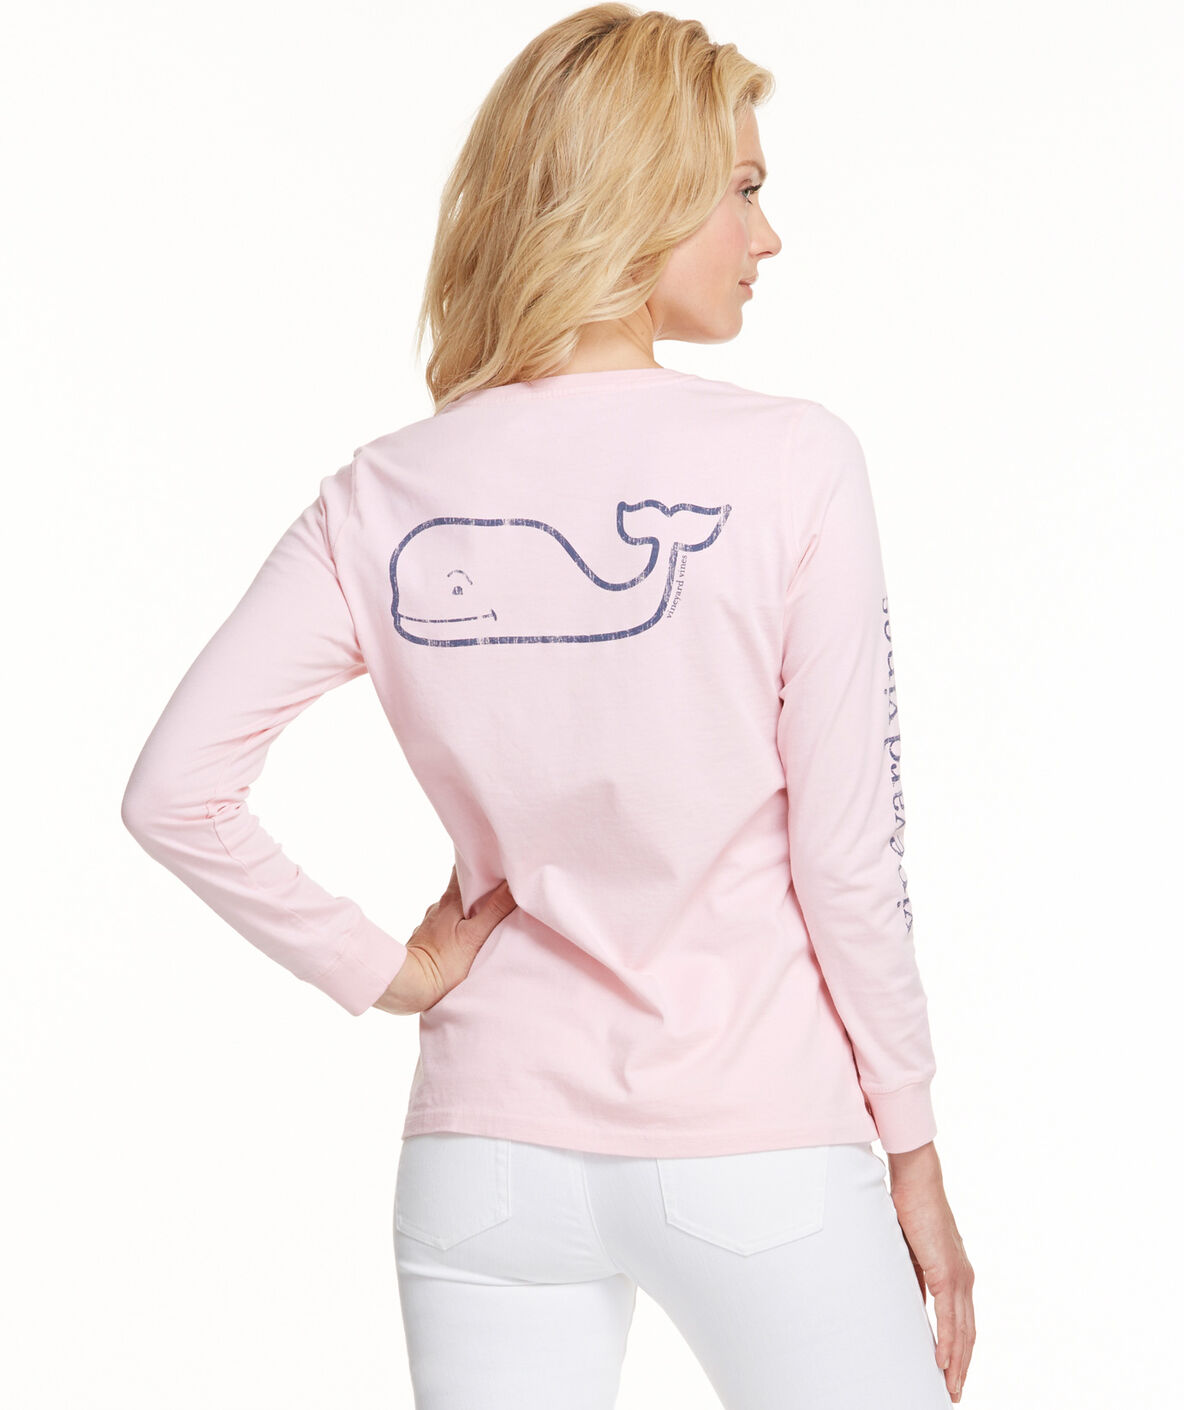 Shop Long-Sleeve Whale Pocket Graphic Tee at vineyard vines